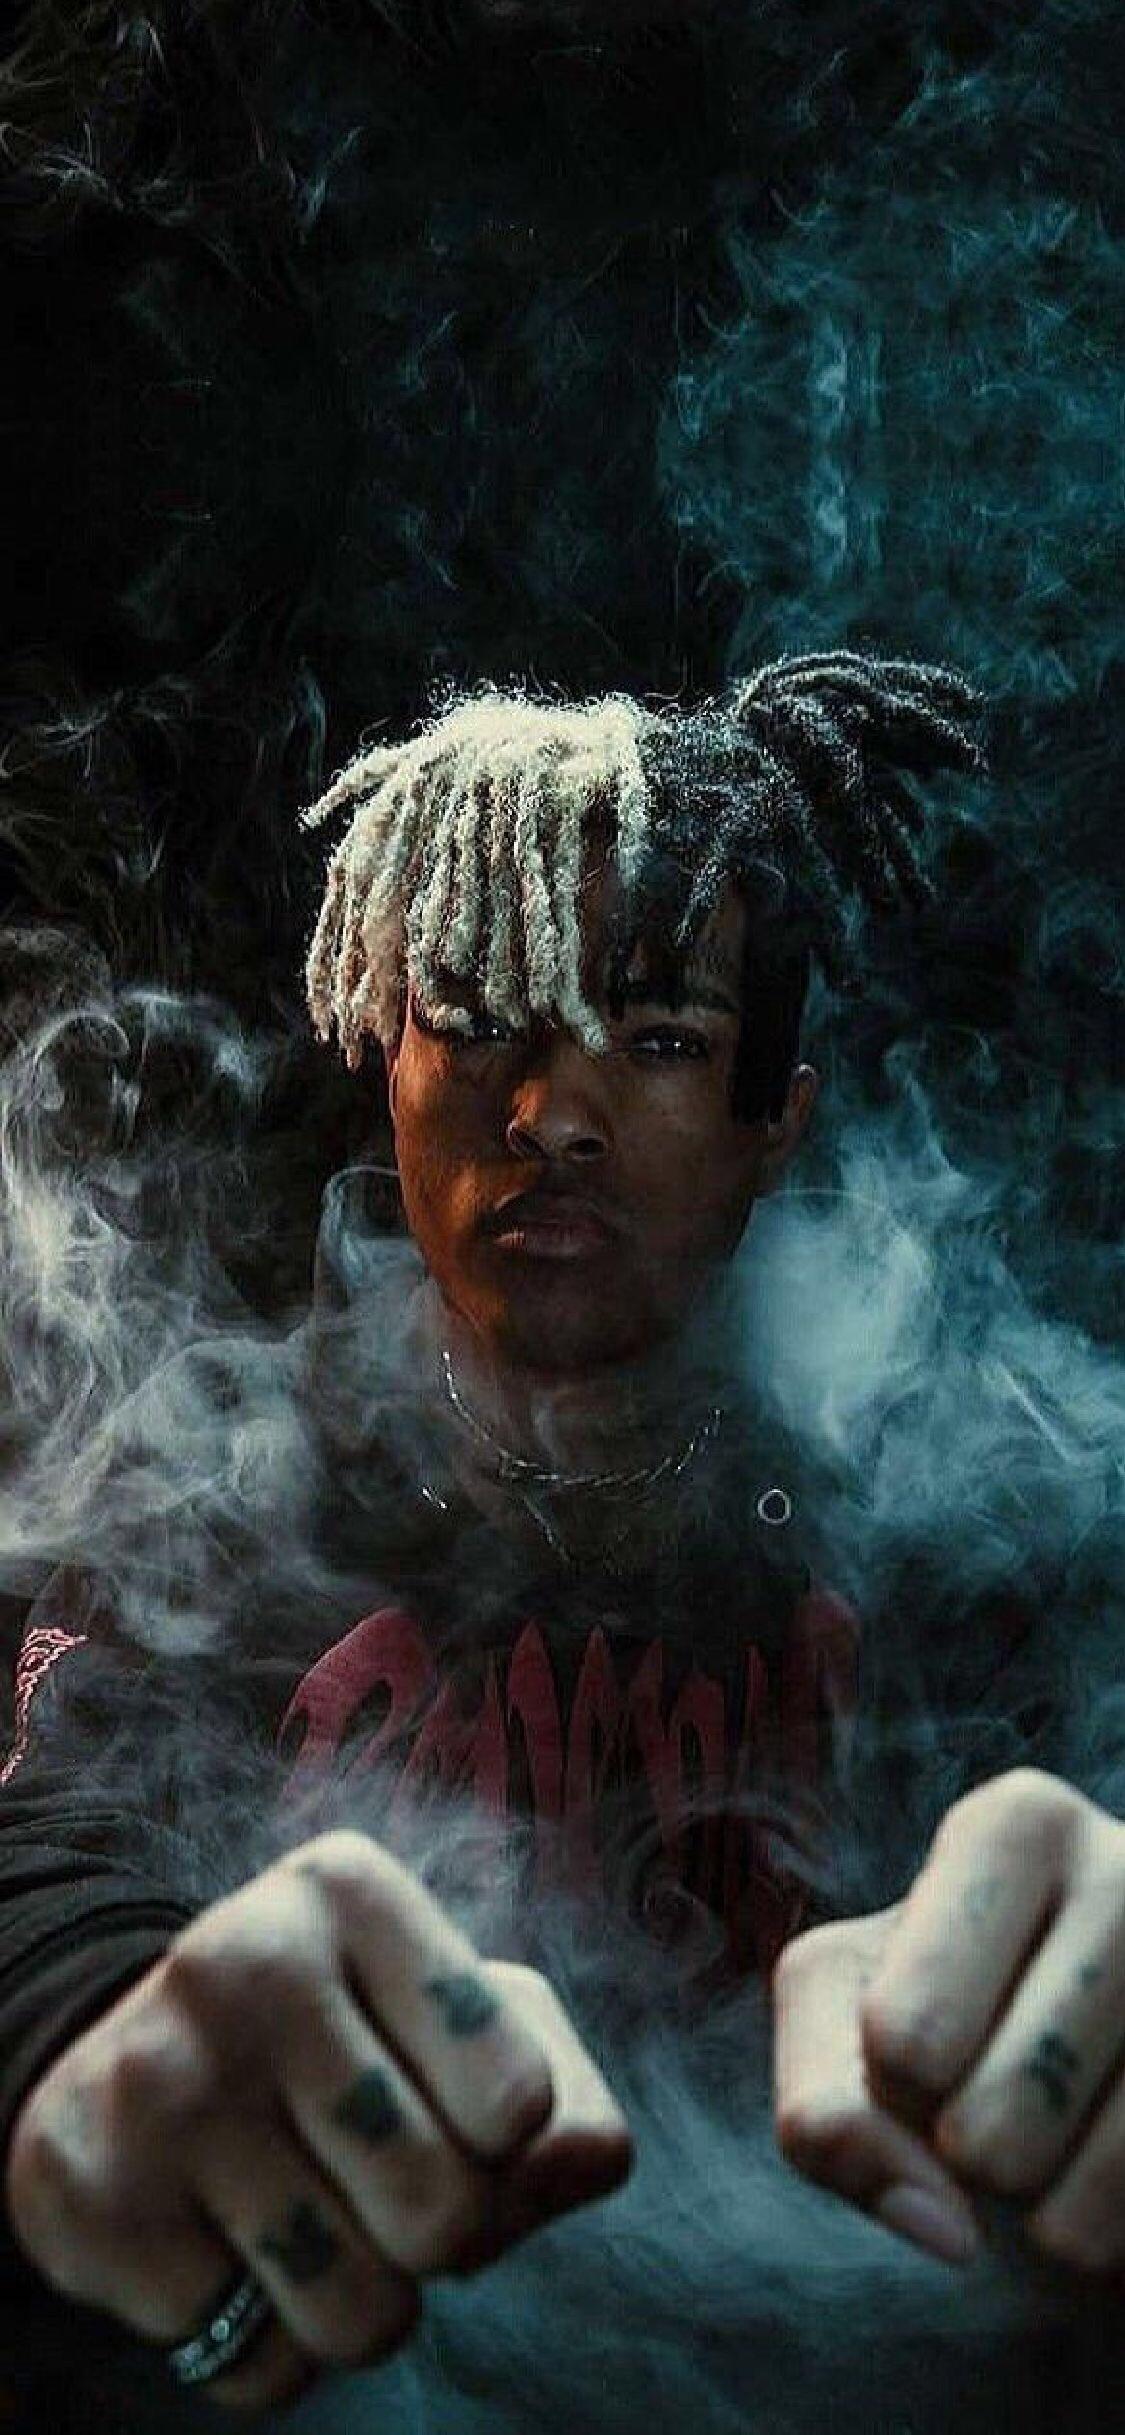 Another Max XXXTENTACION iPhone Wallpapers Free Download